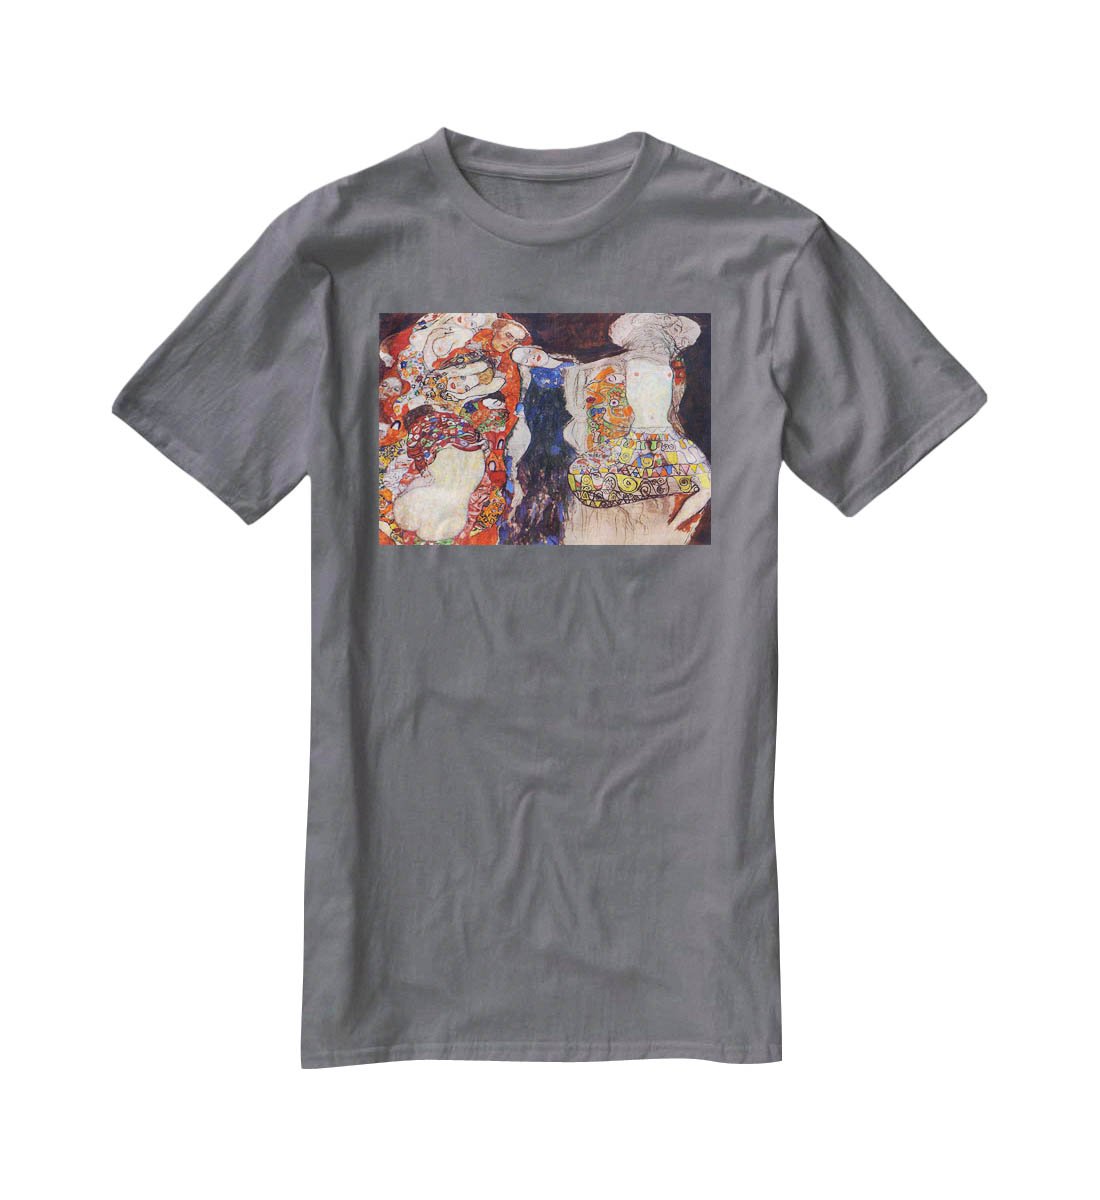 adorn the bride with veil and wreath by Klimt T-Shirt - Canvas Art Rocks - 3